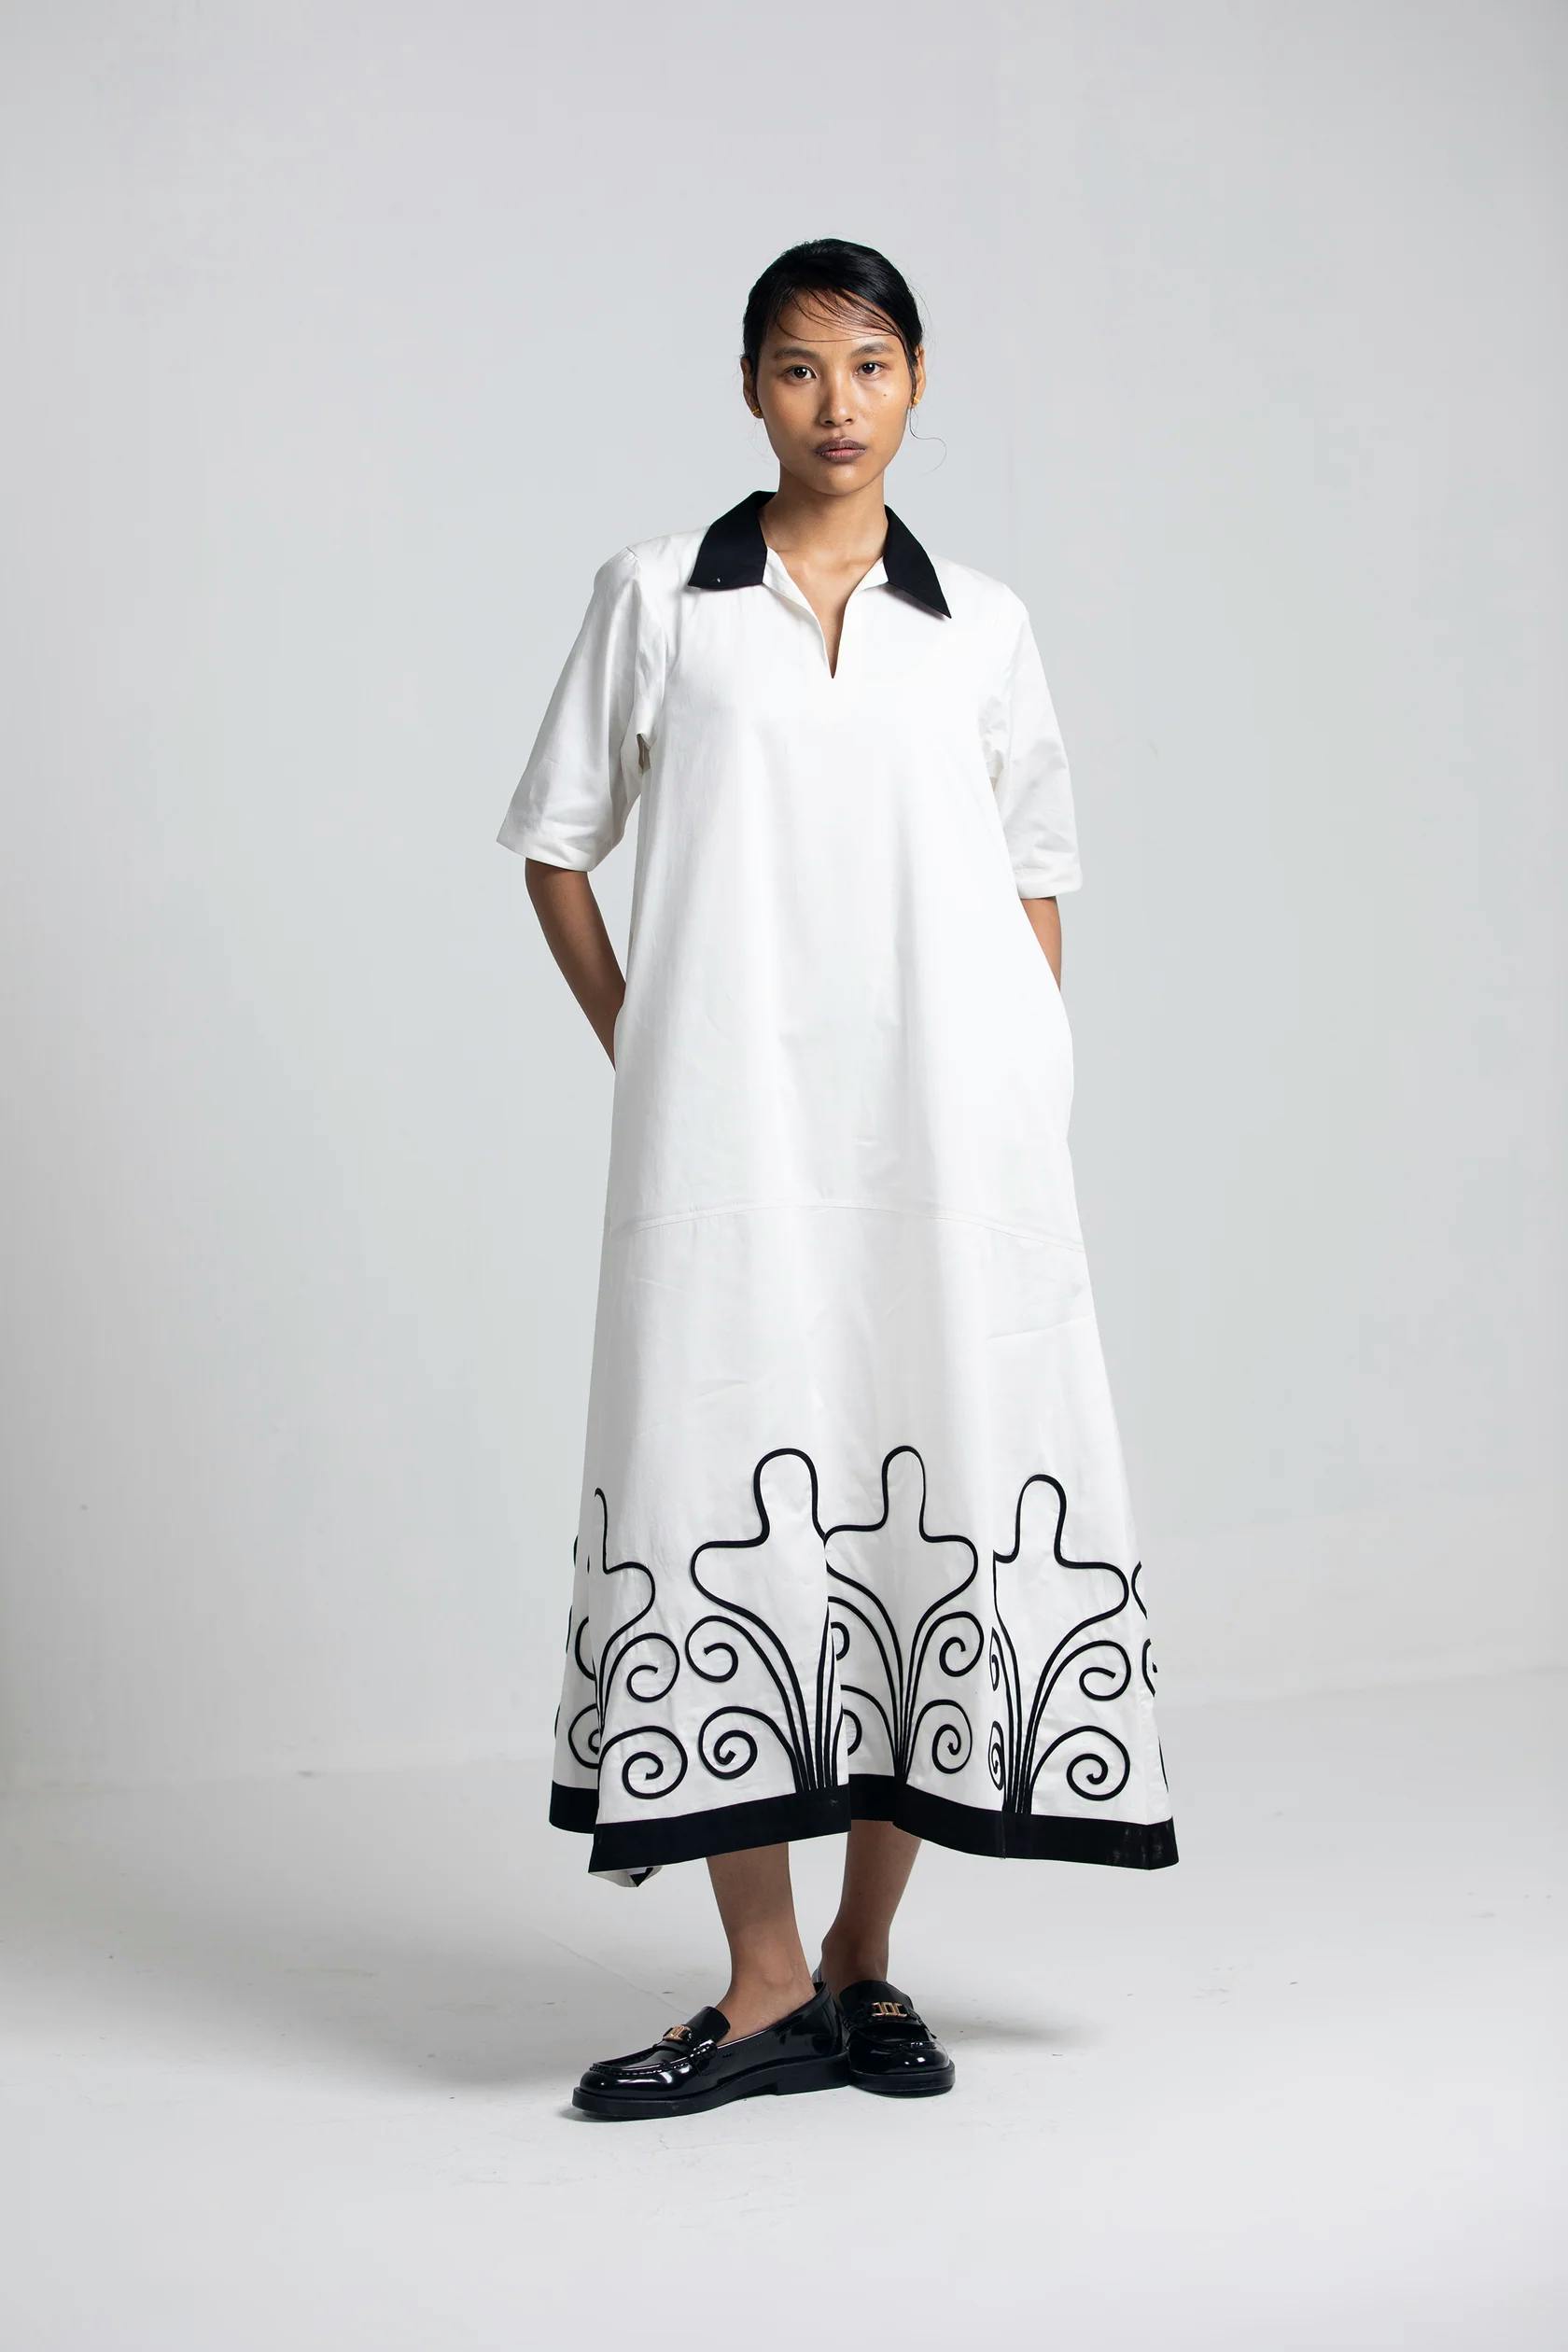 Summer Dress, a product by Corpora Studio